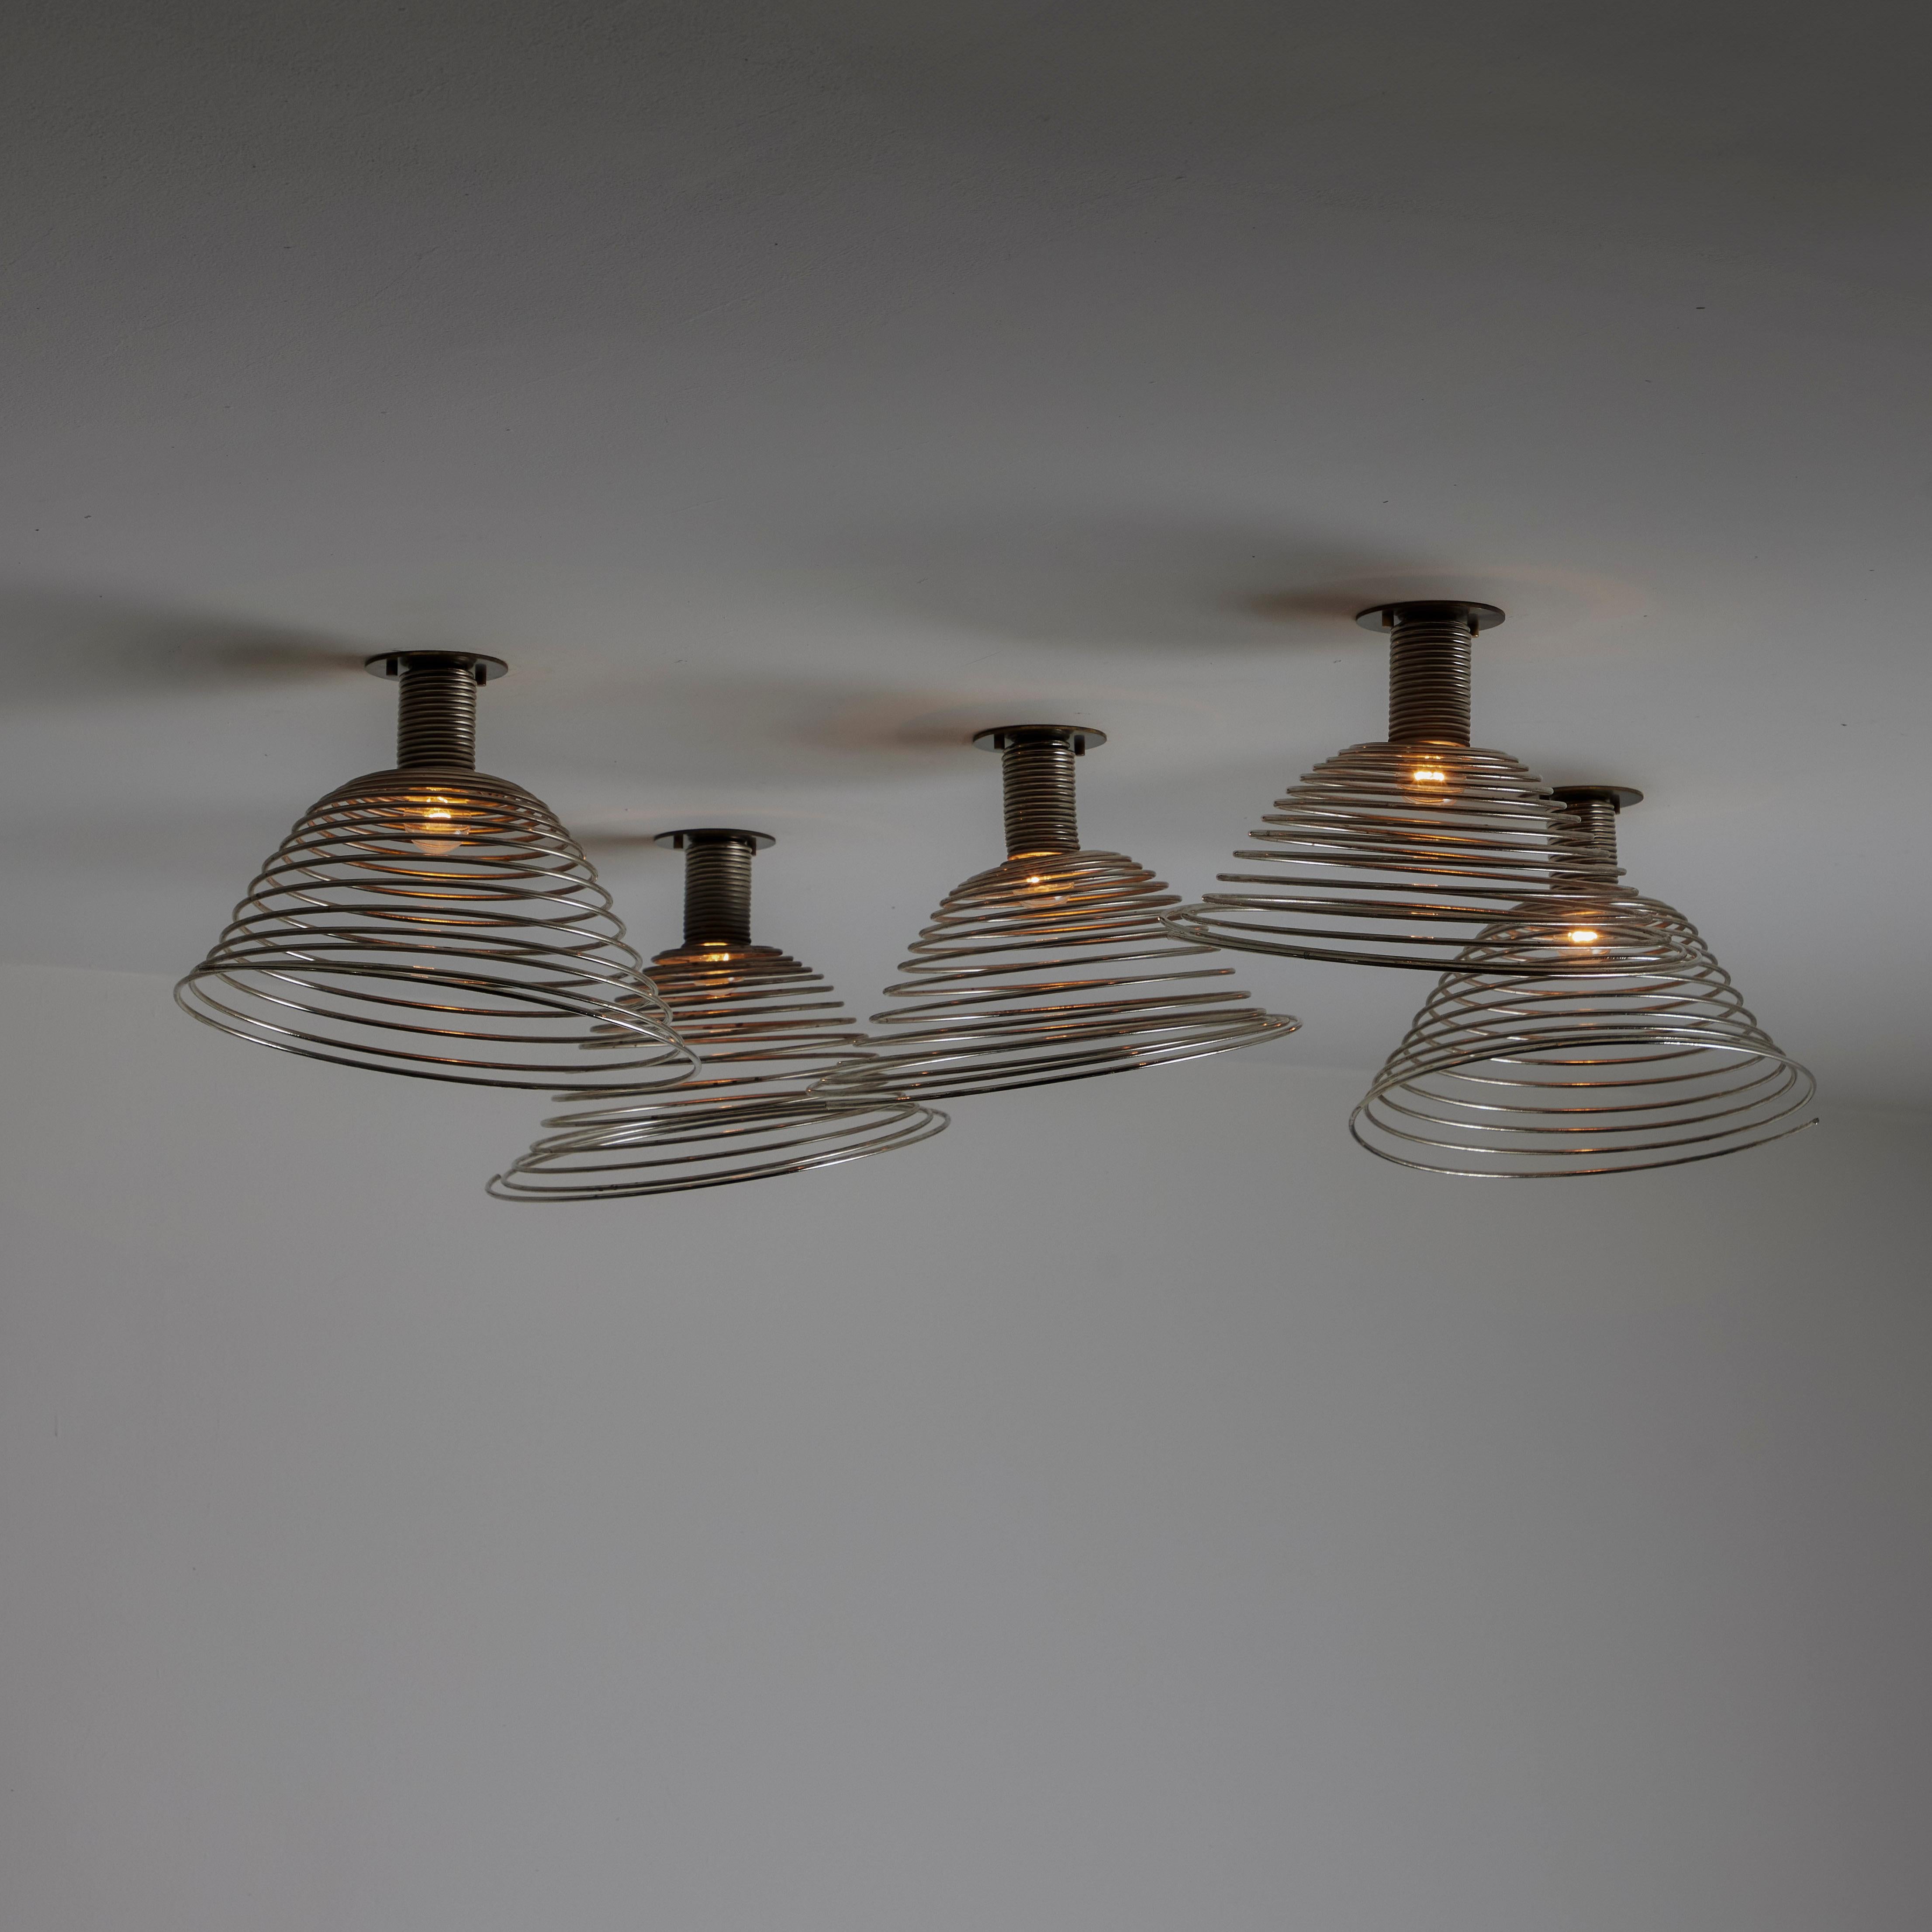 'Spirali' Ceiling or Wall Lights by Angelo Mangiarotti for Candle, Italy, 1960s. Spring steel spiral detail. Strong patina and age to the formations. All flush mounts obtain a particular angle. Each light has a single E27 socket type, adapted for US